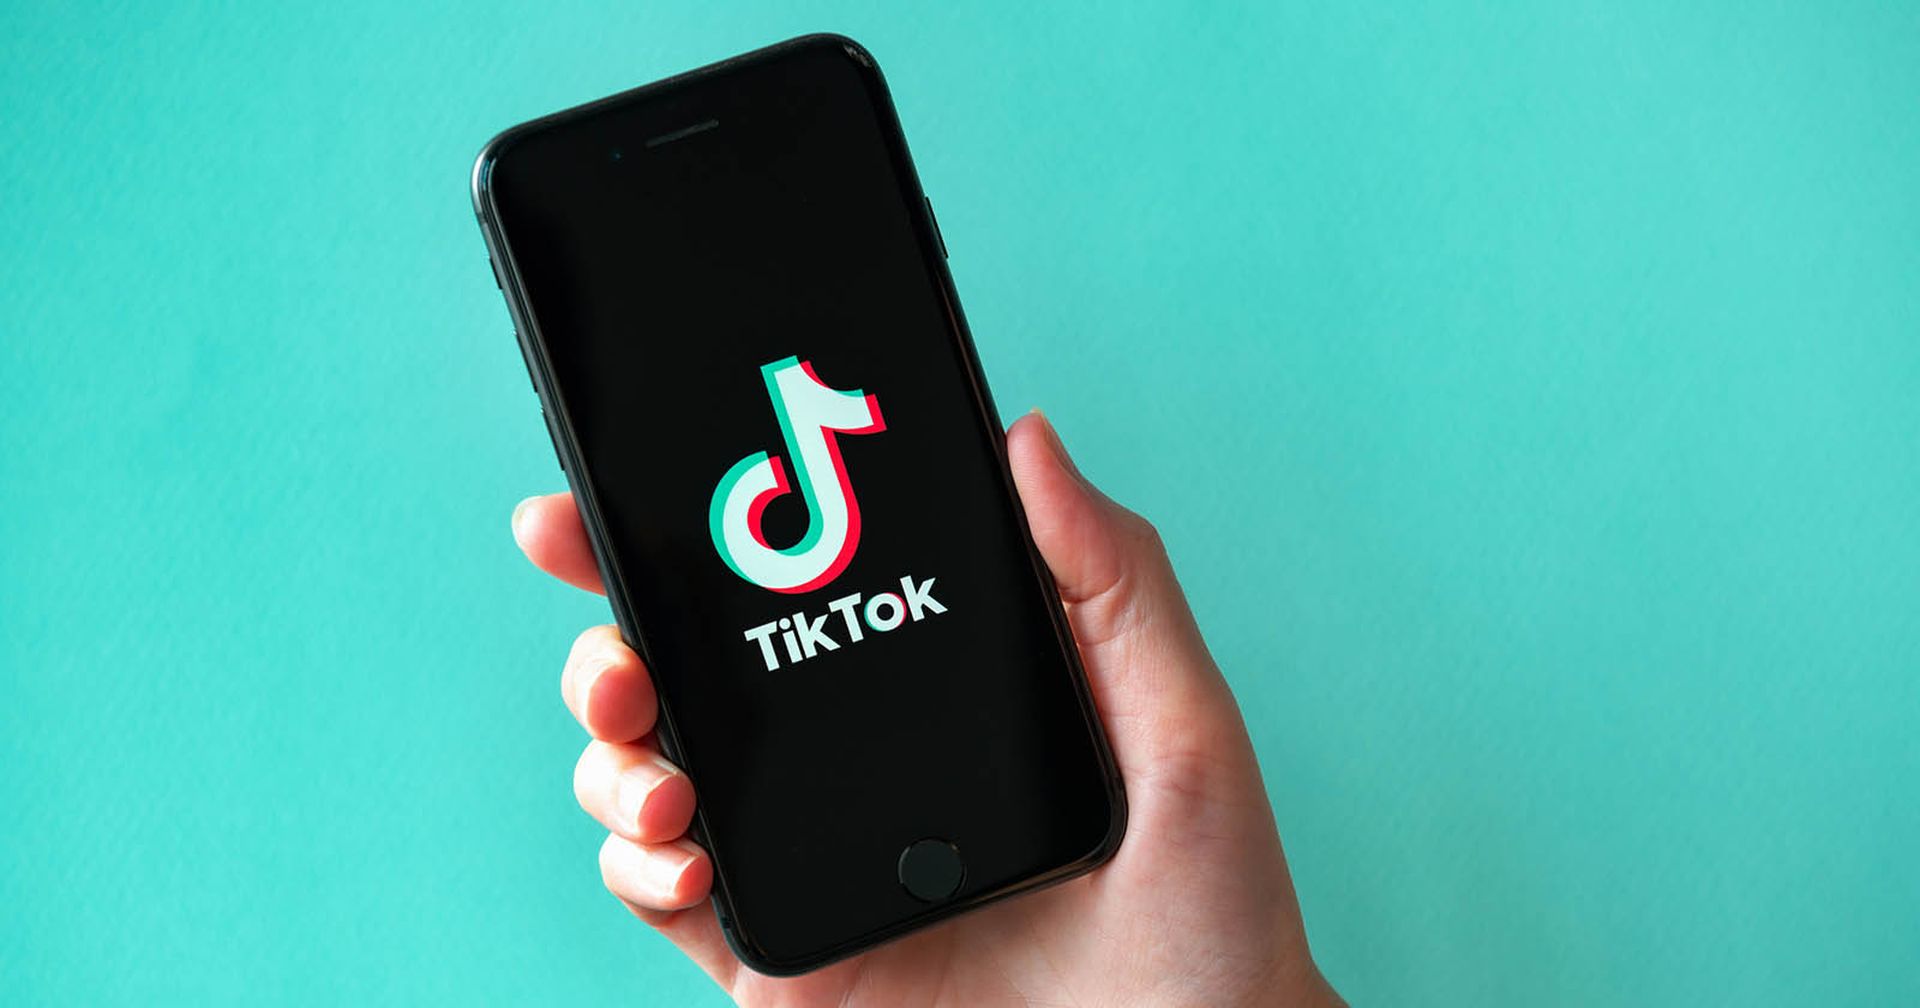 TikTok not sending messages: How to fix the DMs not working issue?